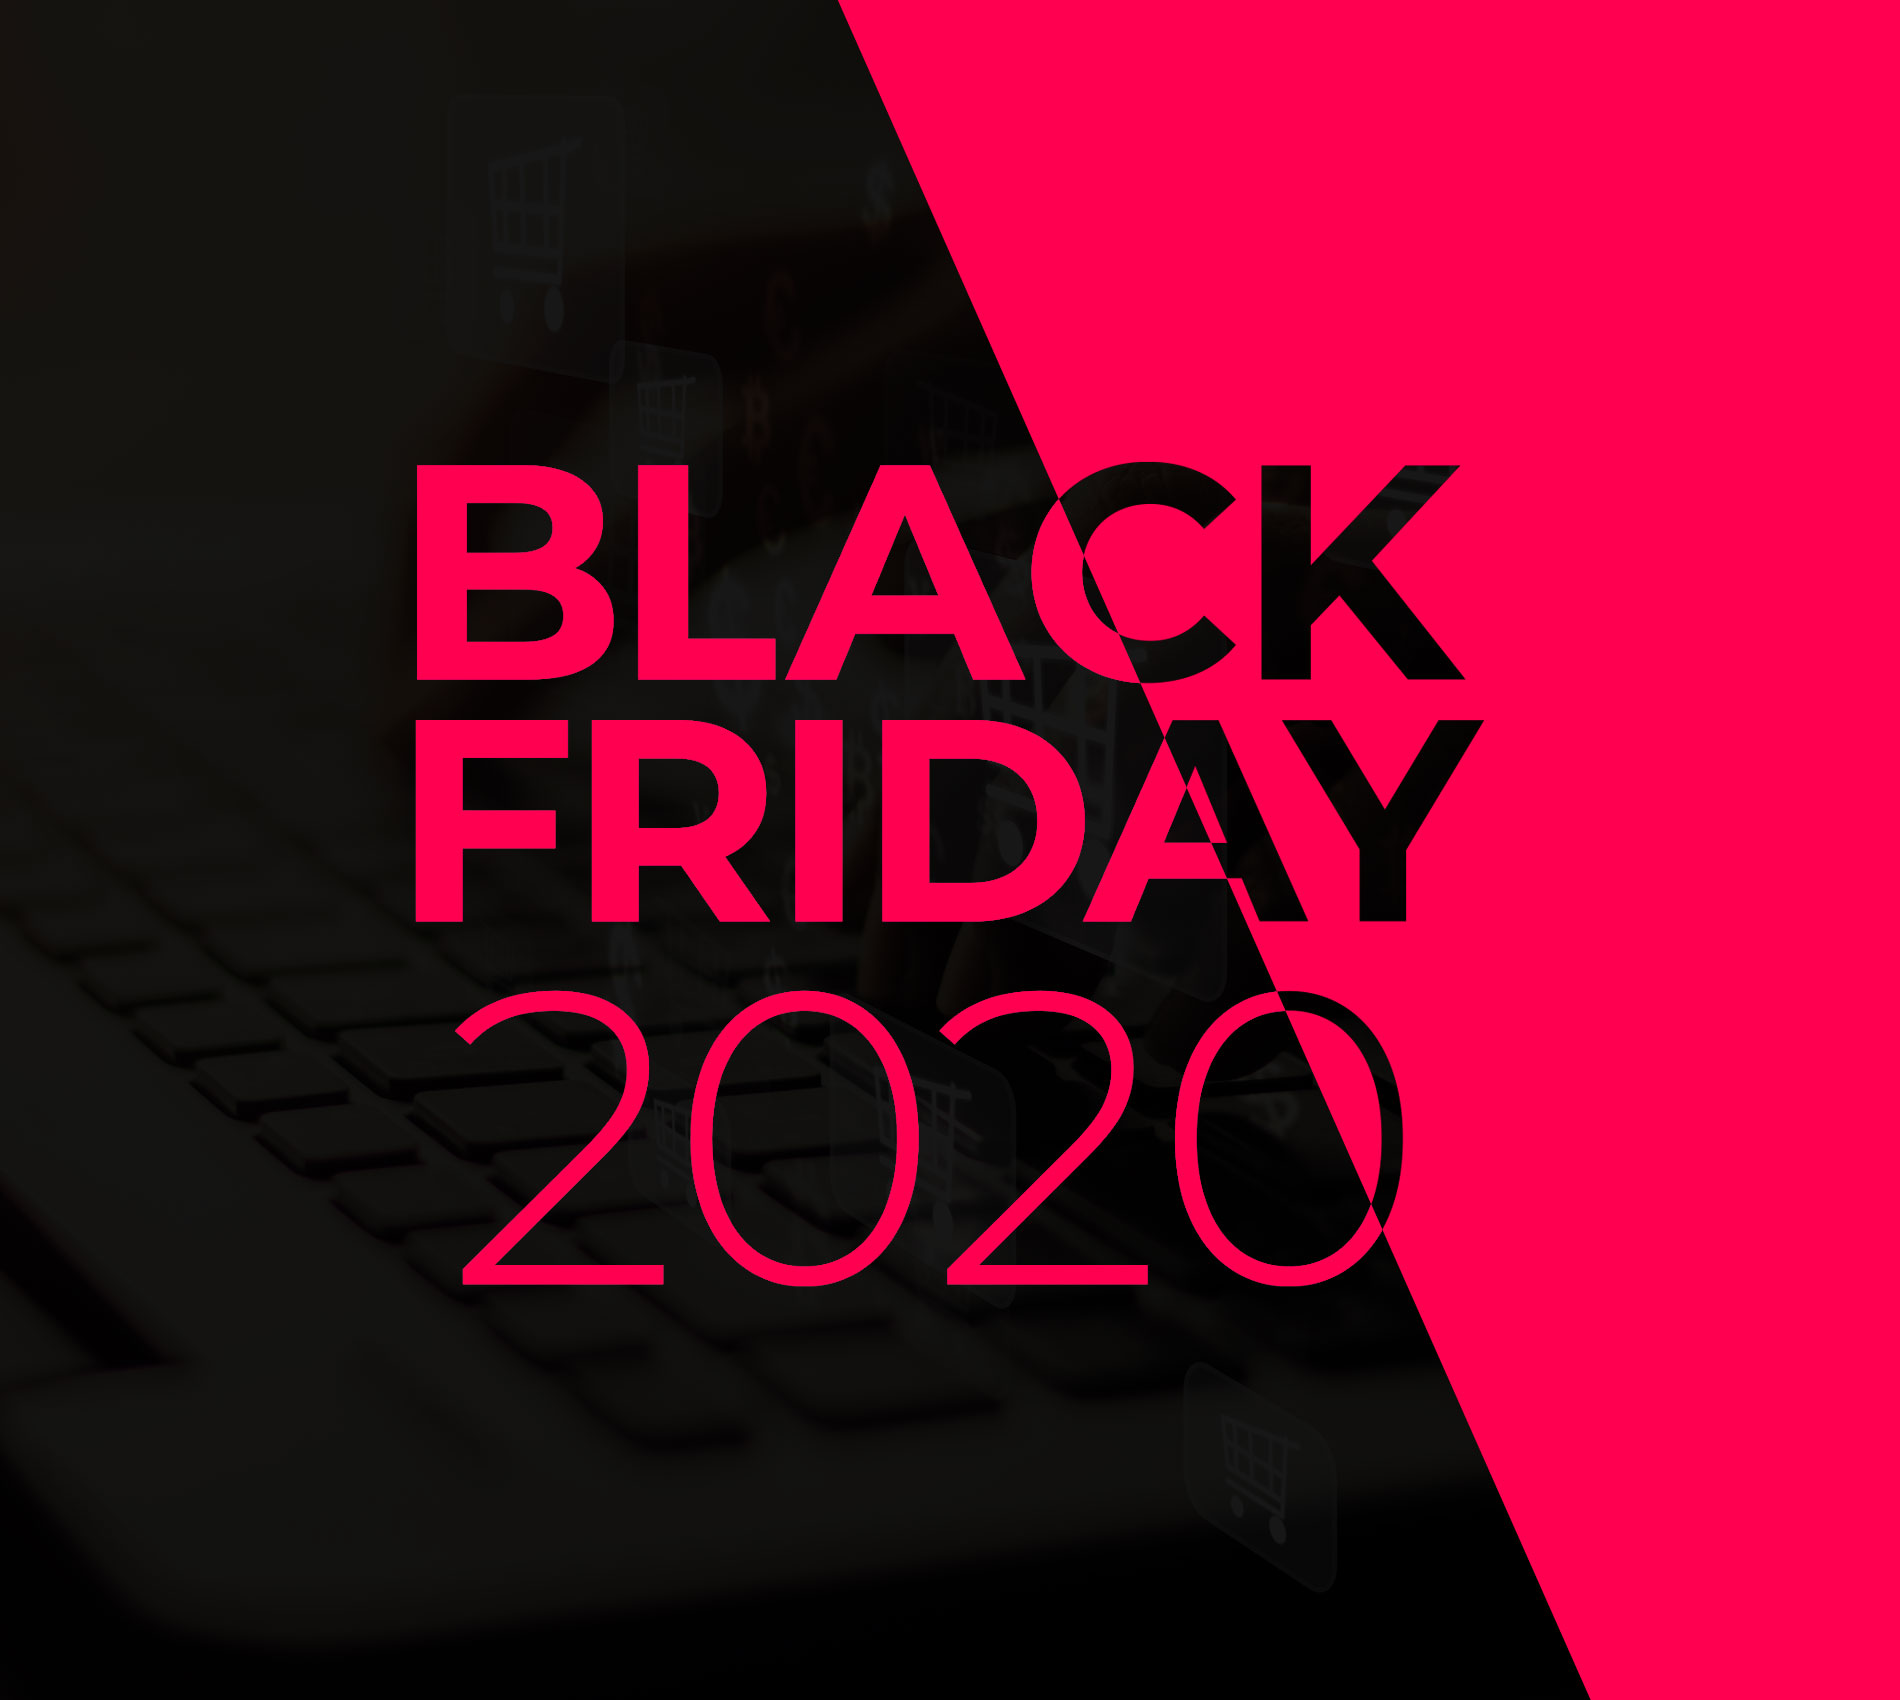 Black Friday 2020: the most digital edition in Brazil’s History